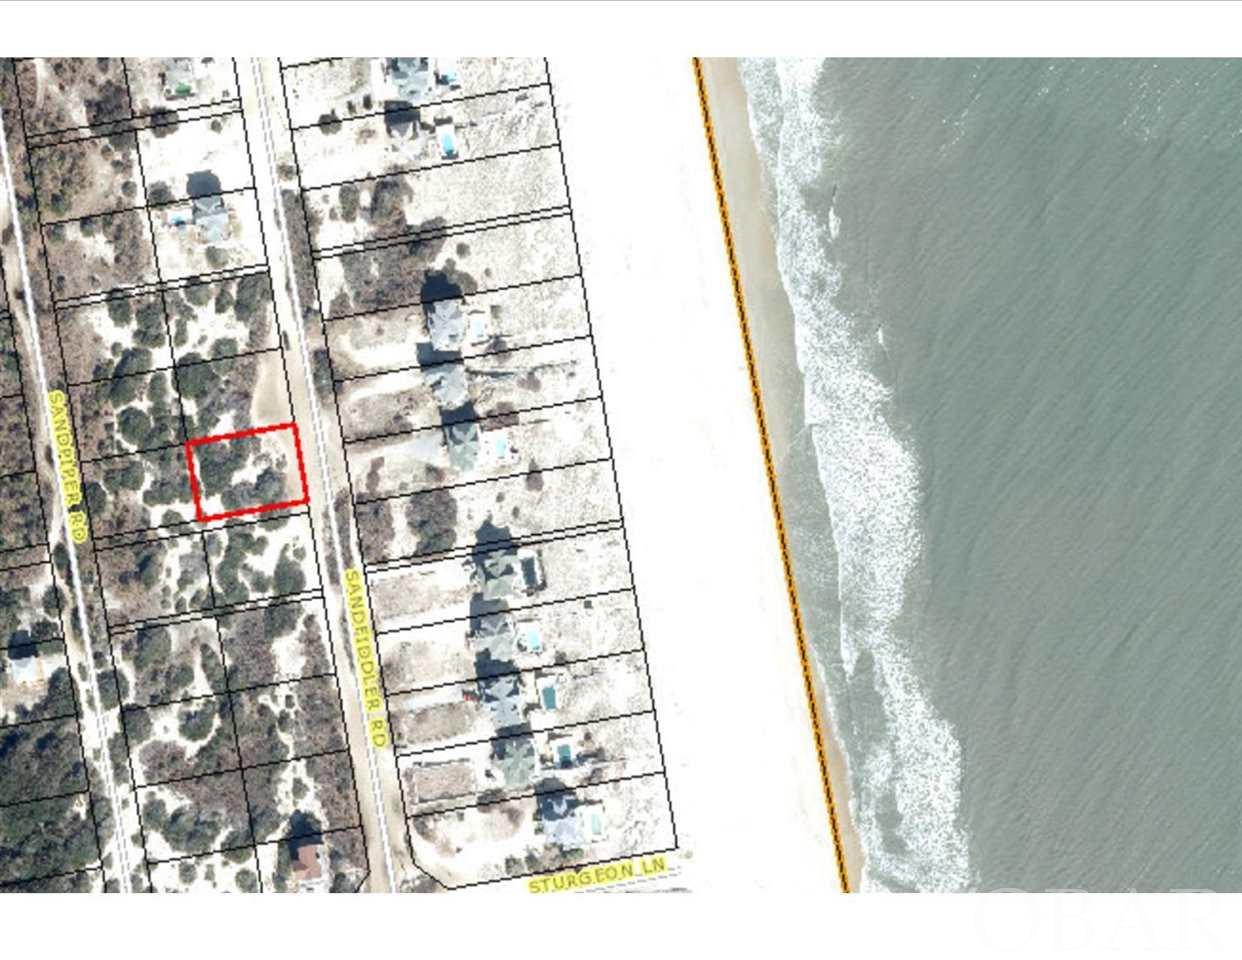 Come get away from it all and have beautiful wild horses as your neighbors. This gorgeous semi-oceanfront homesite is 1 lot away from a platted pedestrian easement to the beach. Located in an X flood zone, so no flood insurance is required. There are many beautiful live oak trees on this homesite. The excellent elevation will provide gorgeous ocean views for any home built here.